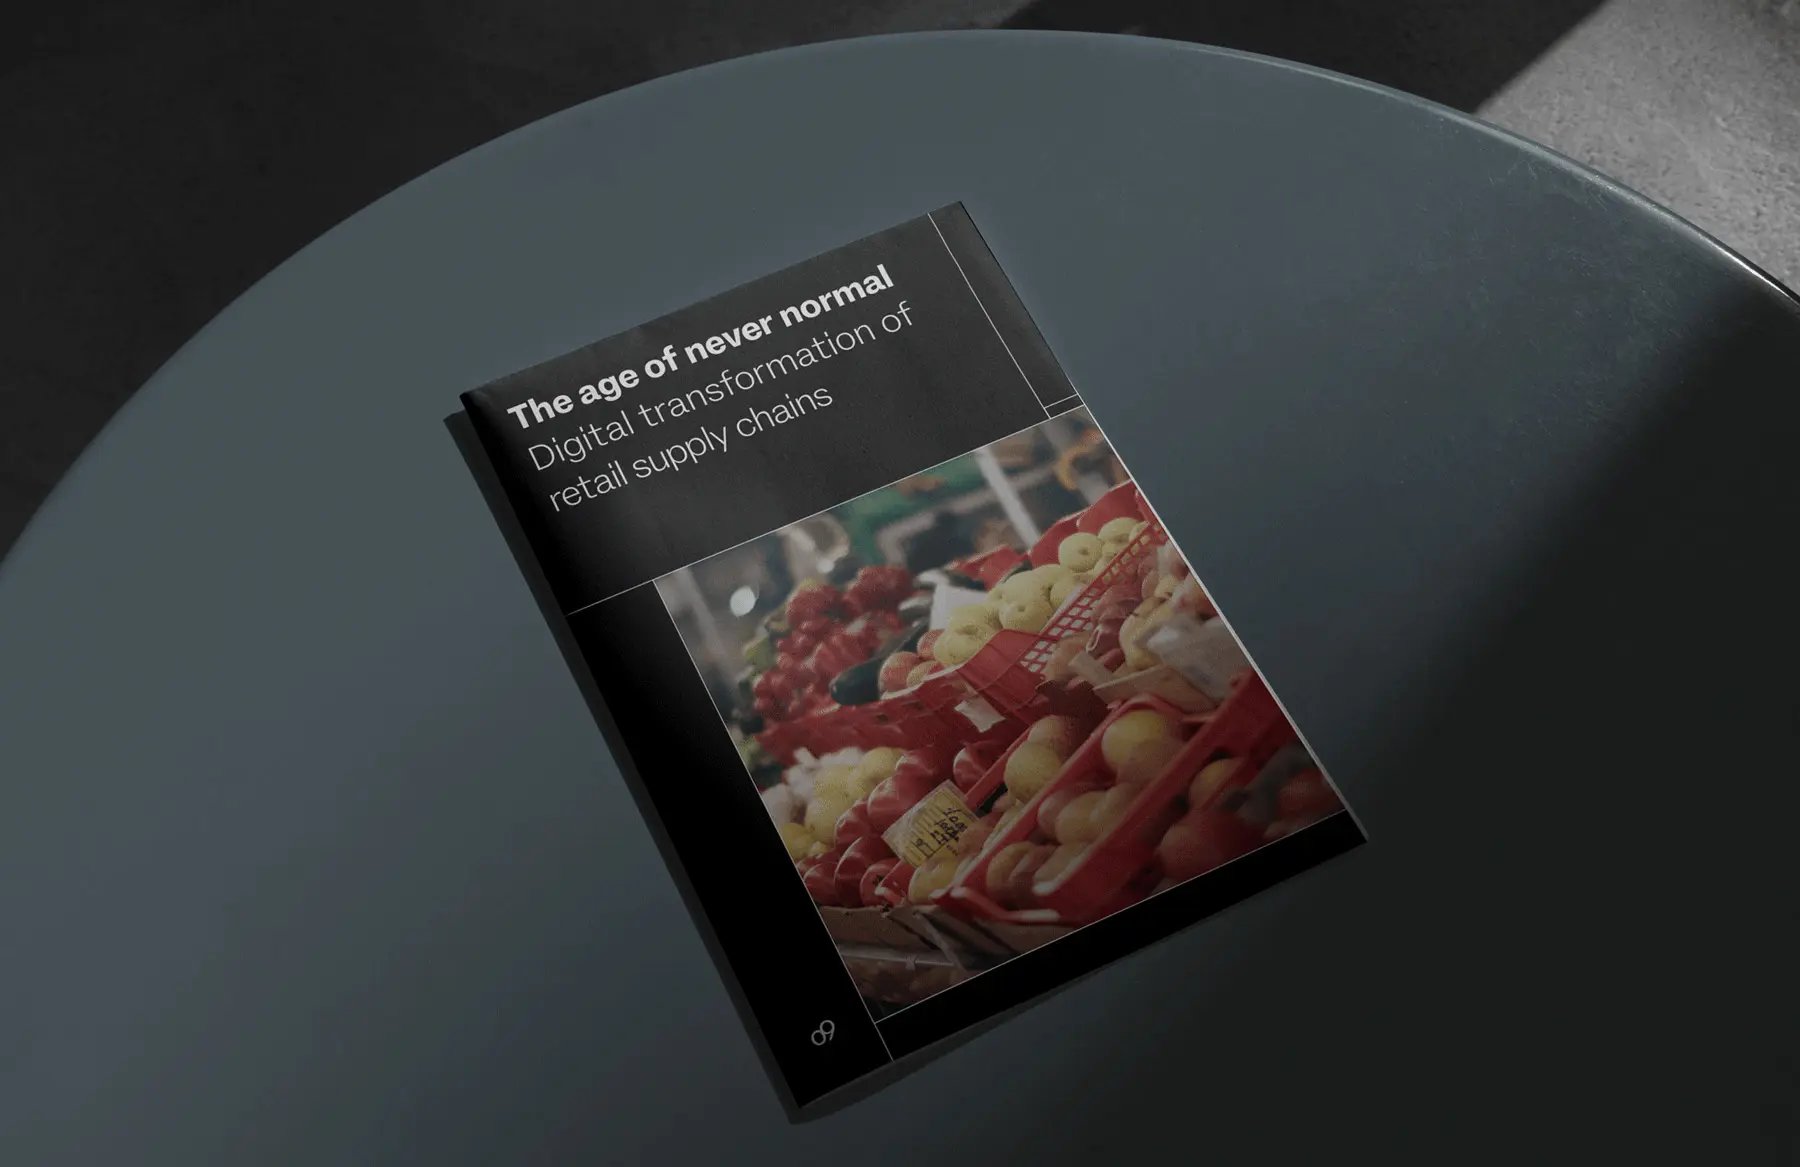 White paper mockup digital transformation of retail supply chains